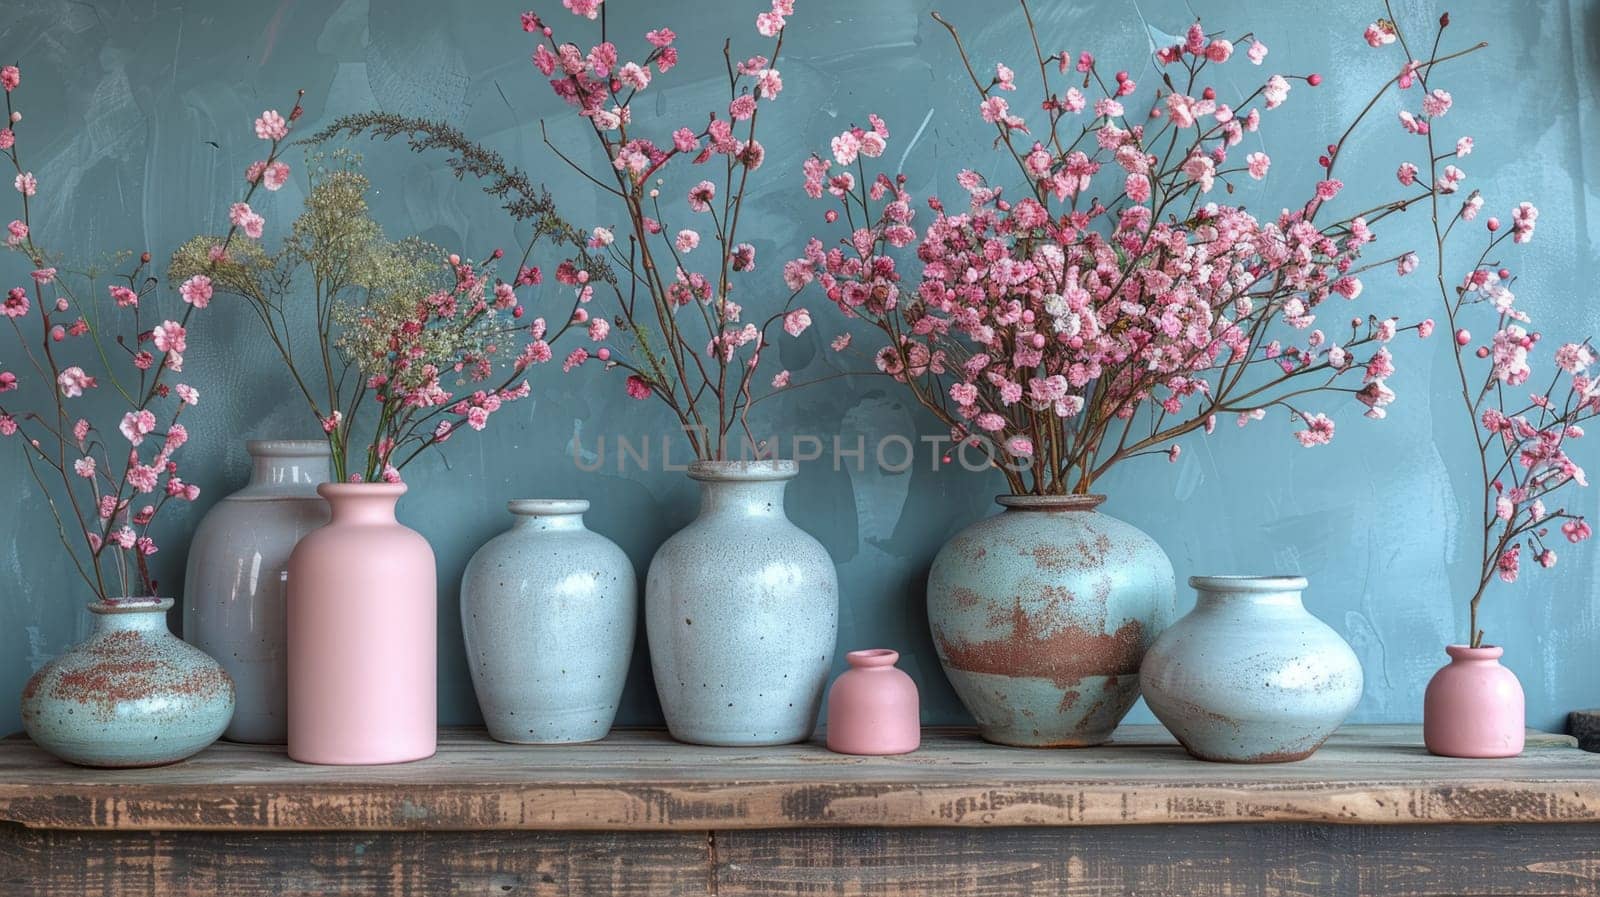 A line of vases showcasing a variety of vibrant colored flowers in bloom. Bright potted flowers on the background.